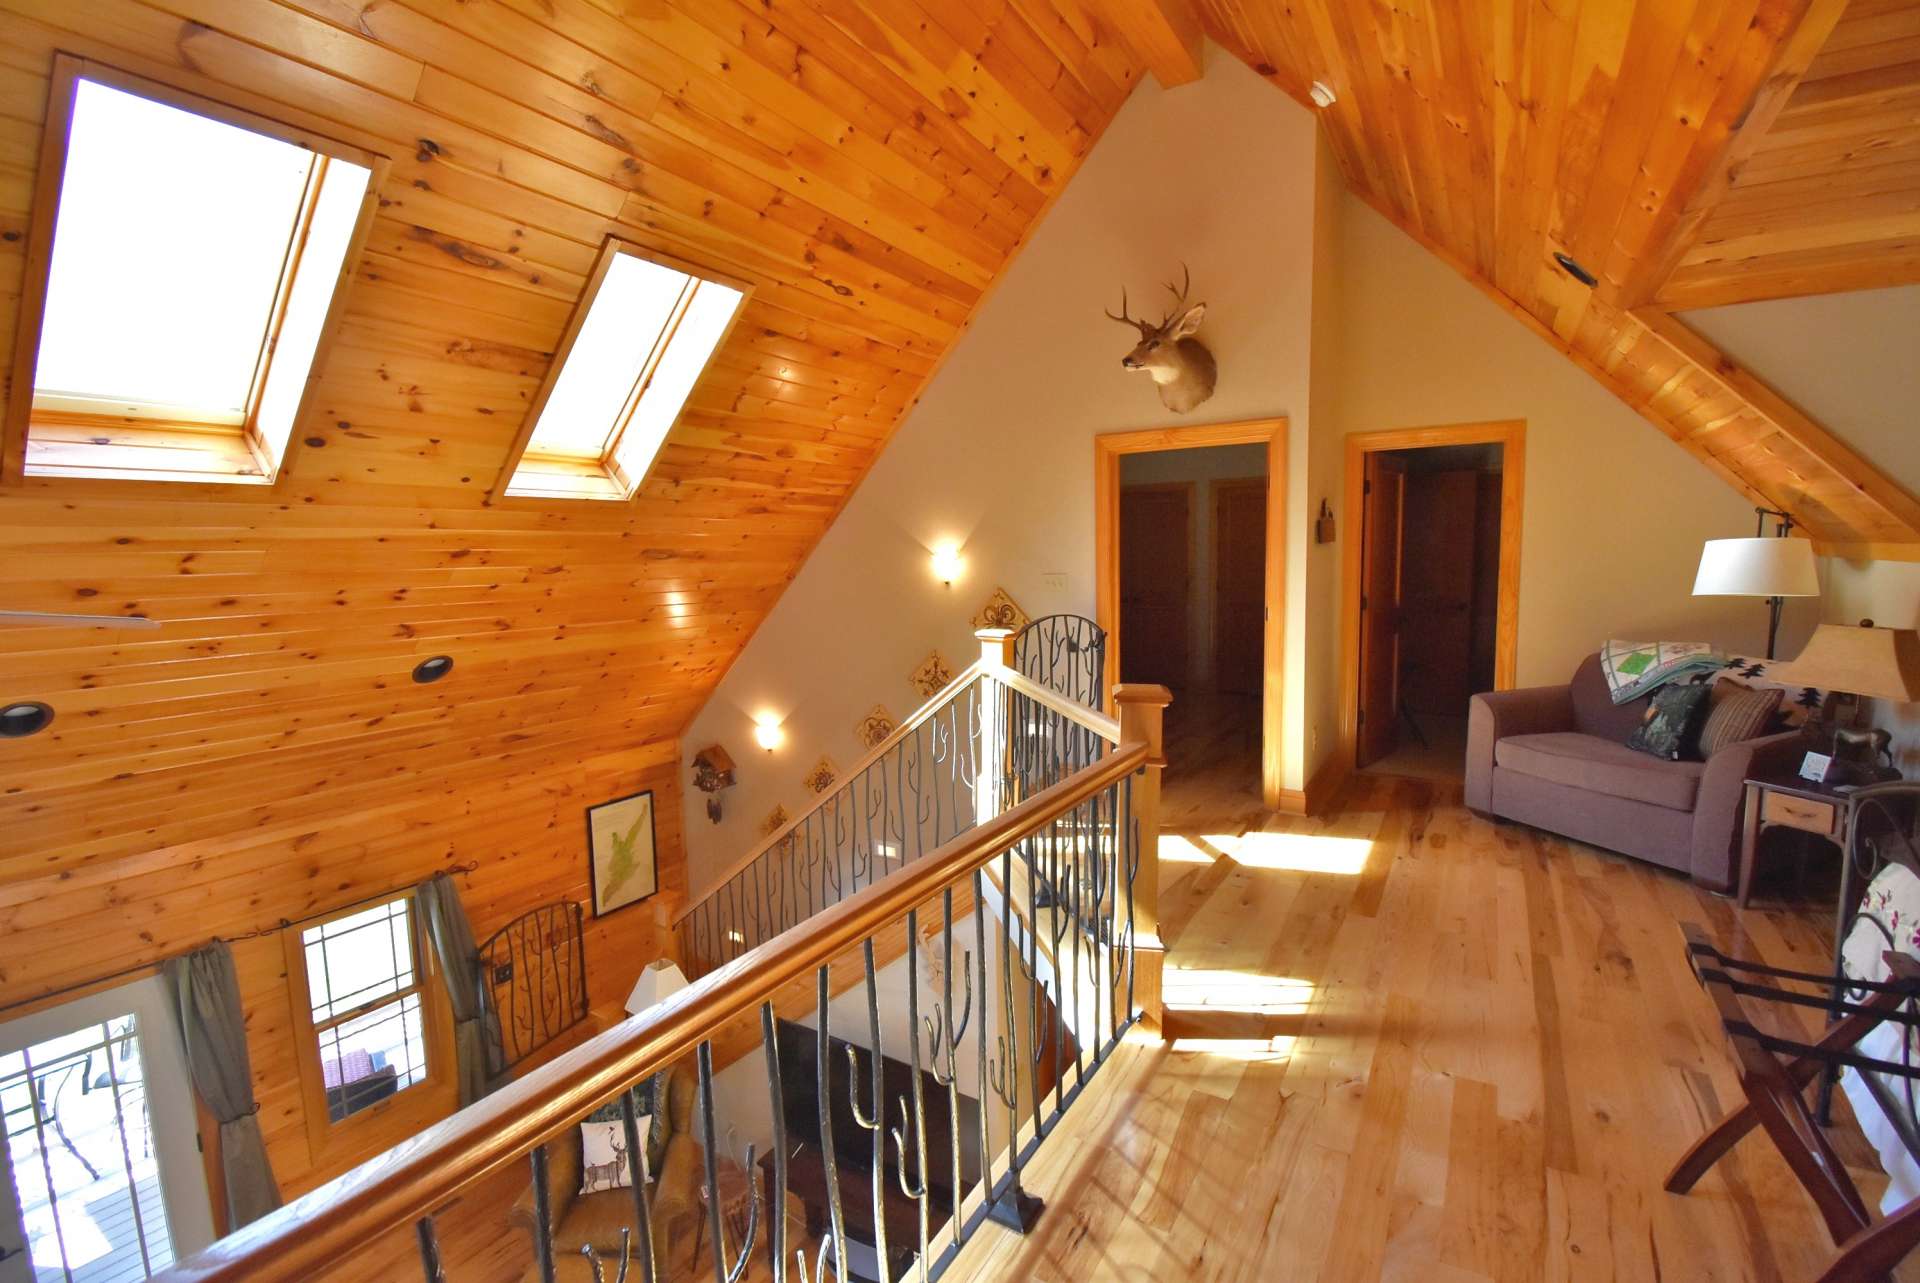 The upper level loft over looks the great room and also features skylights filling the upper level with natural light.